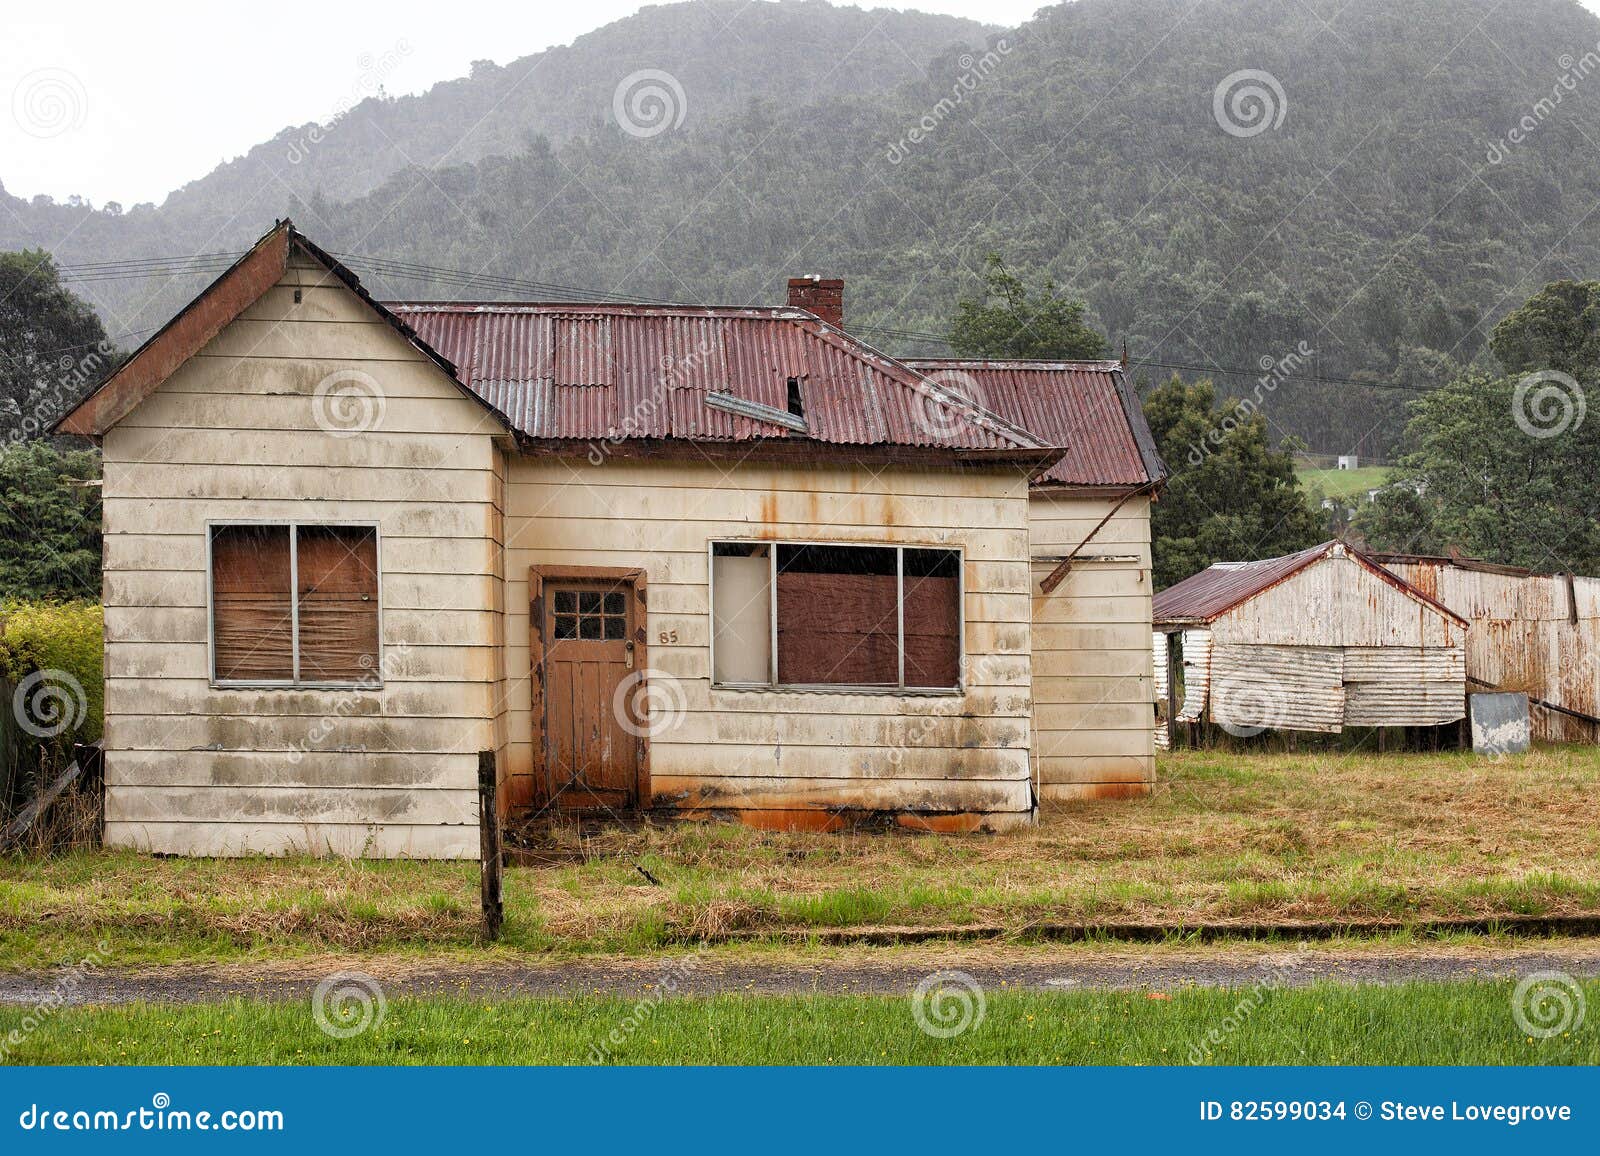 Abandoned old timber home stock photo. Image of worn ...